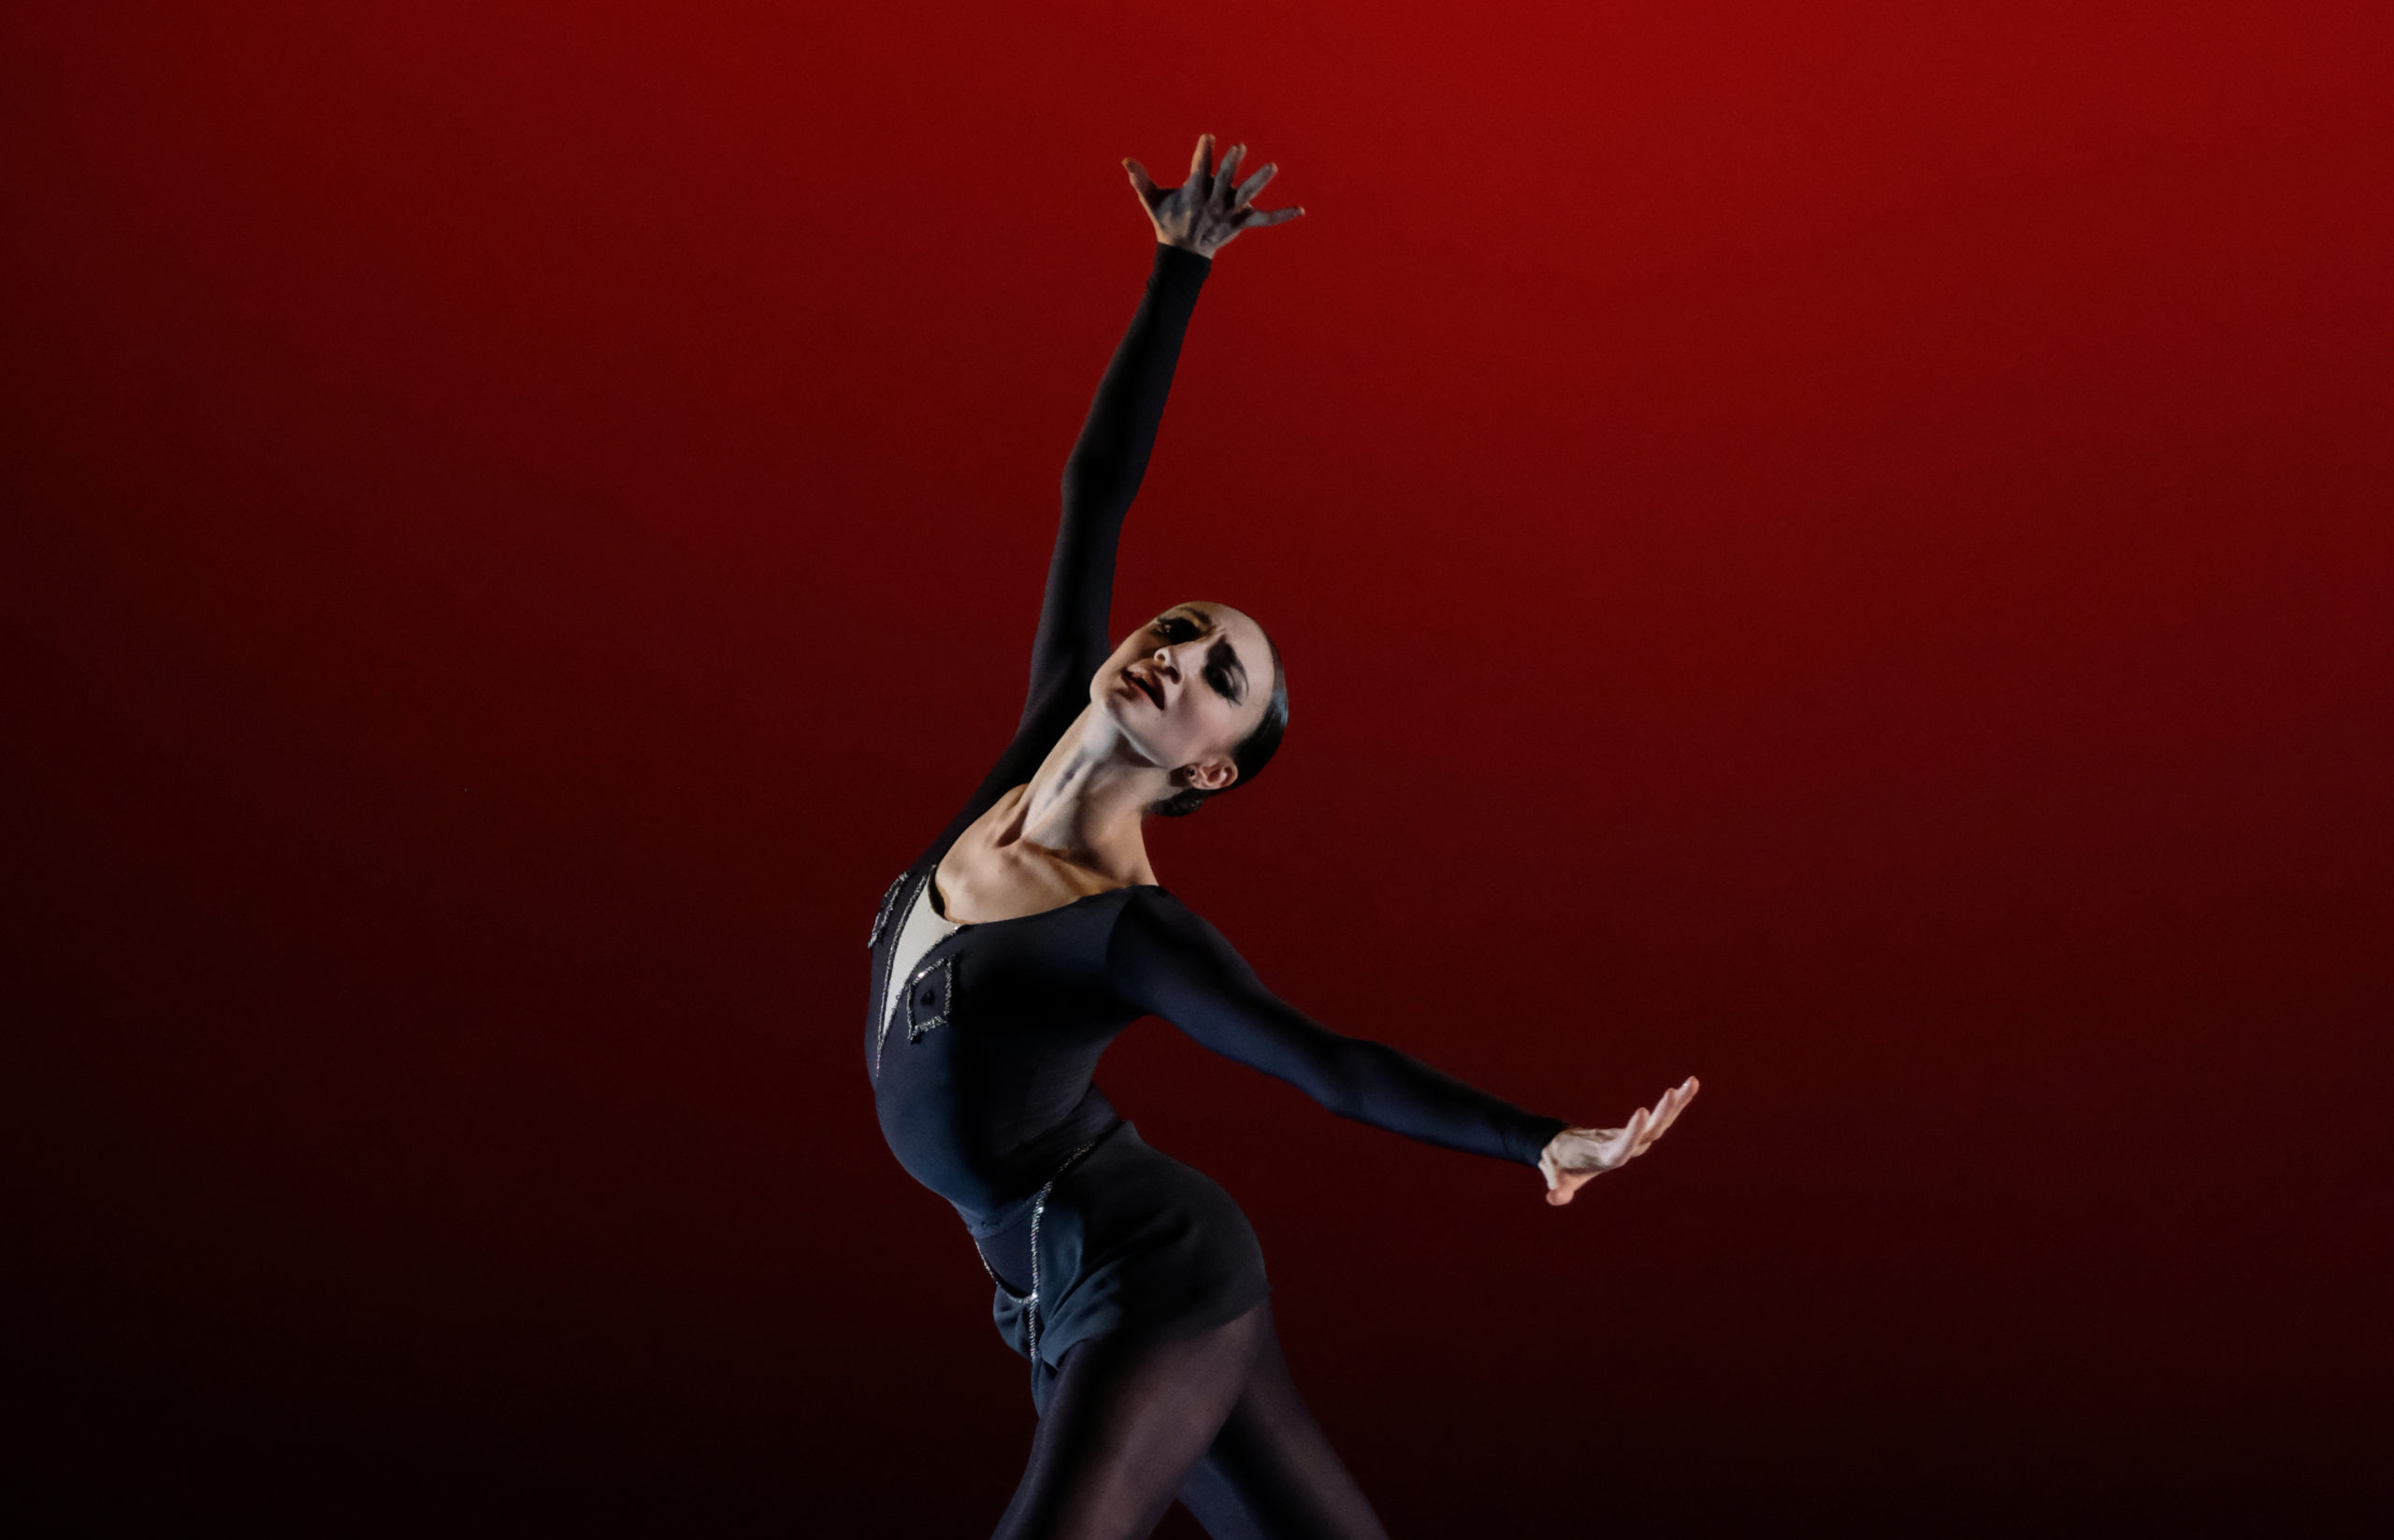 Katia Raj is shown from the thigh up in croisé, standing on her leg leg in plié and spreading her arms out wide with splayed fingers. She looks out into the audience dramatically, and wears a dark velvet leotard with rhinestone decor and dark tights.